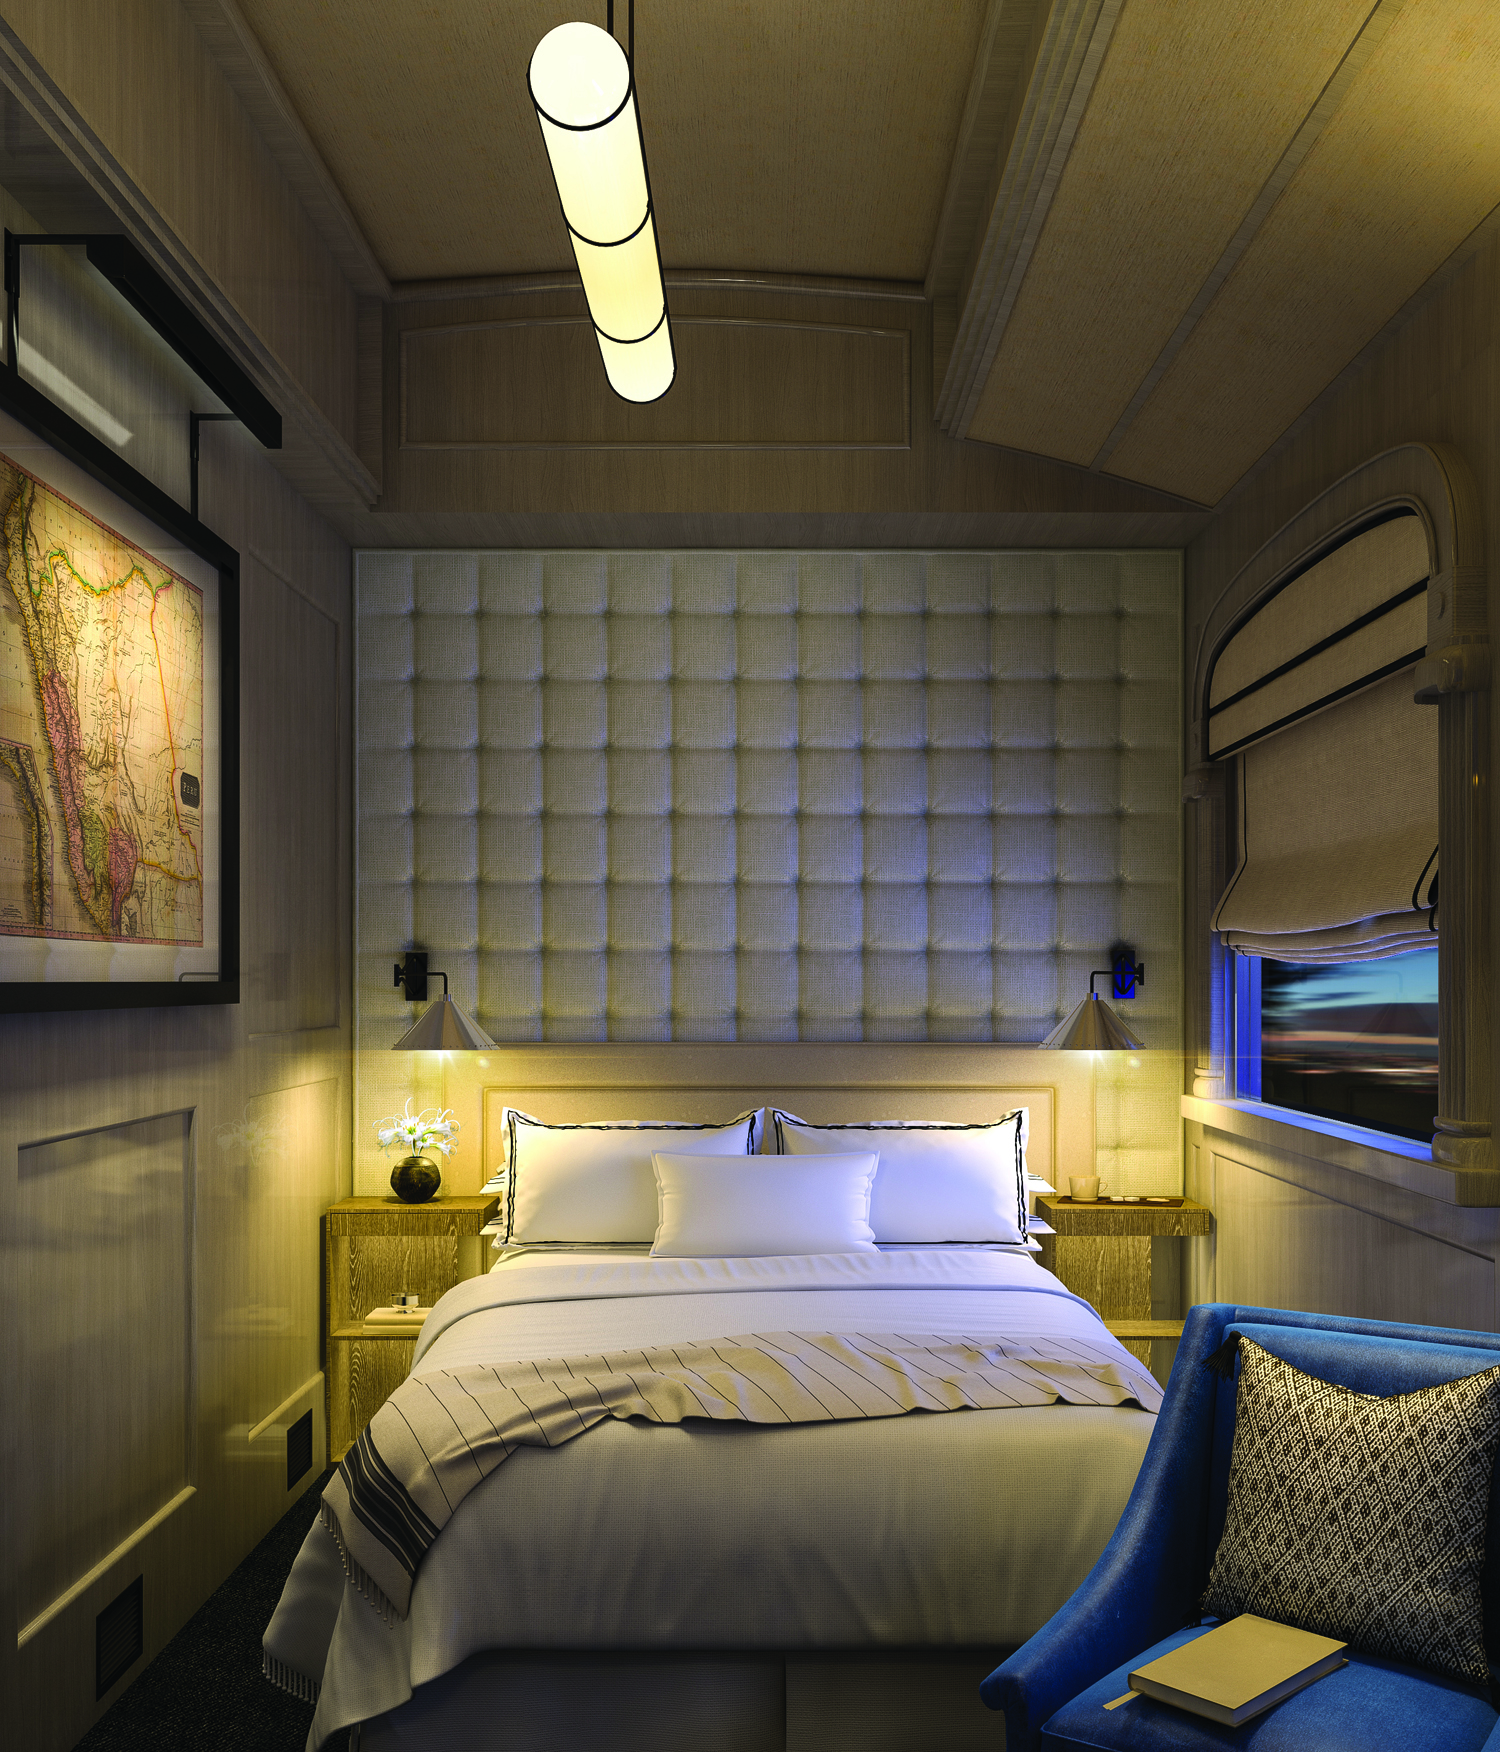 This May, the Belmond Andean Explorer—South America’s first luxury sleeper train—will debut in Peru.